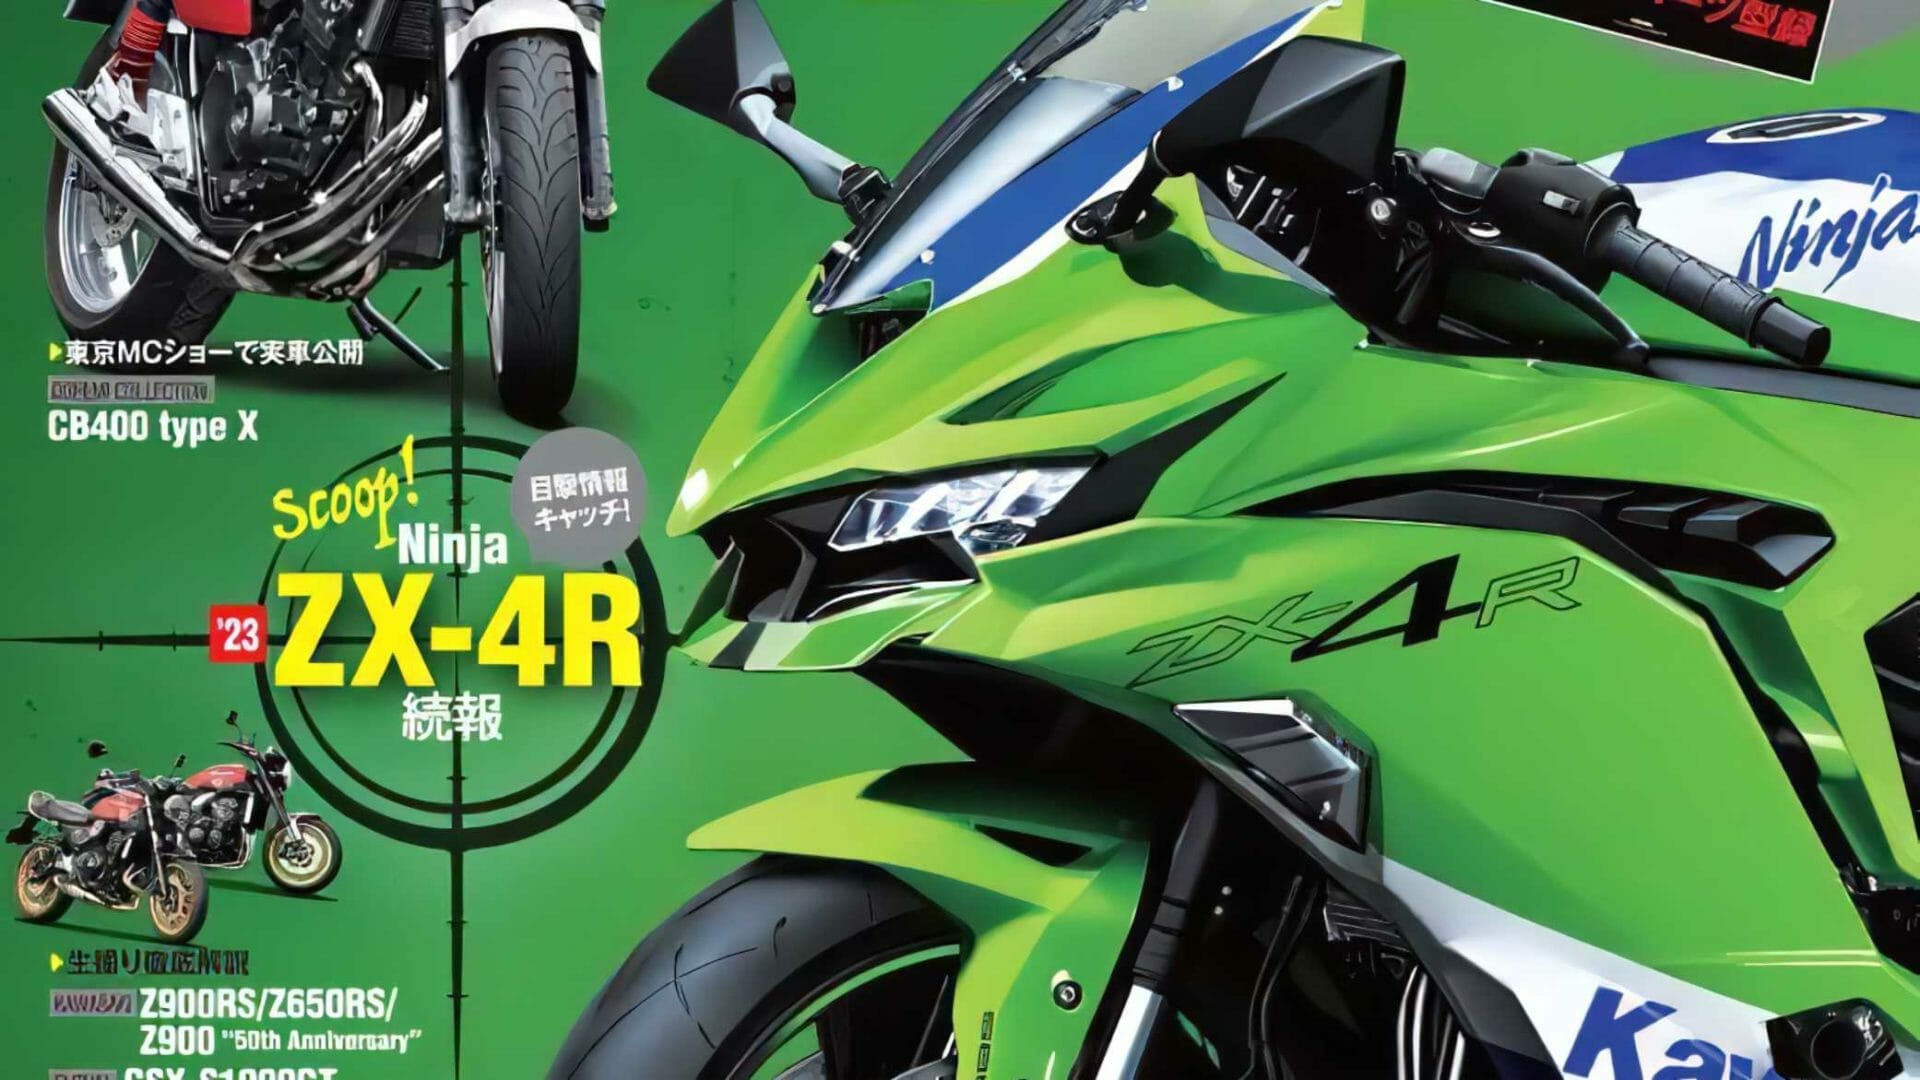 Kawasaki ZX-4R - what can we expect? - Motorcycles.News 